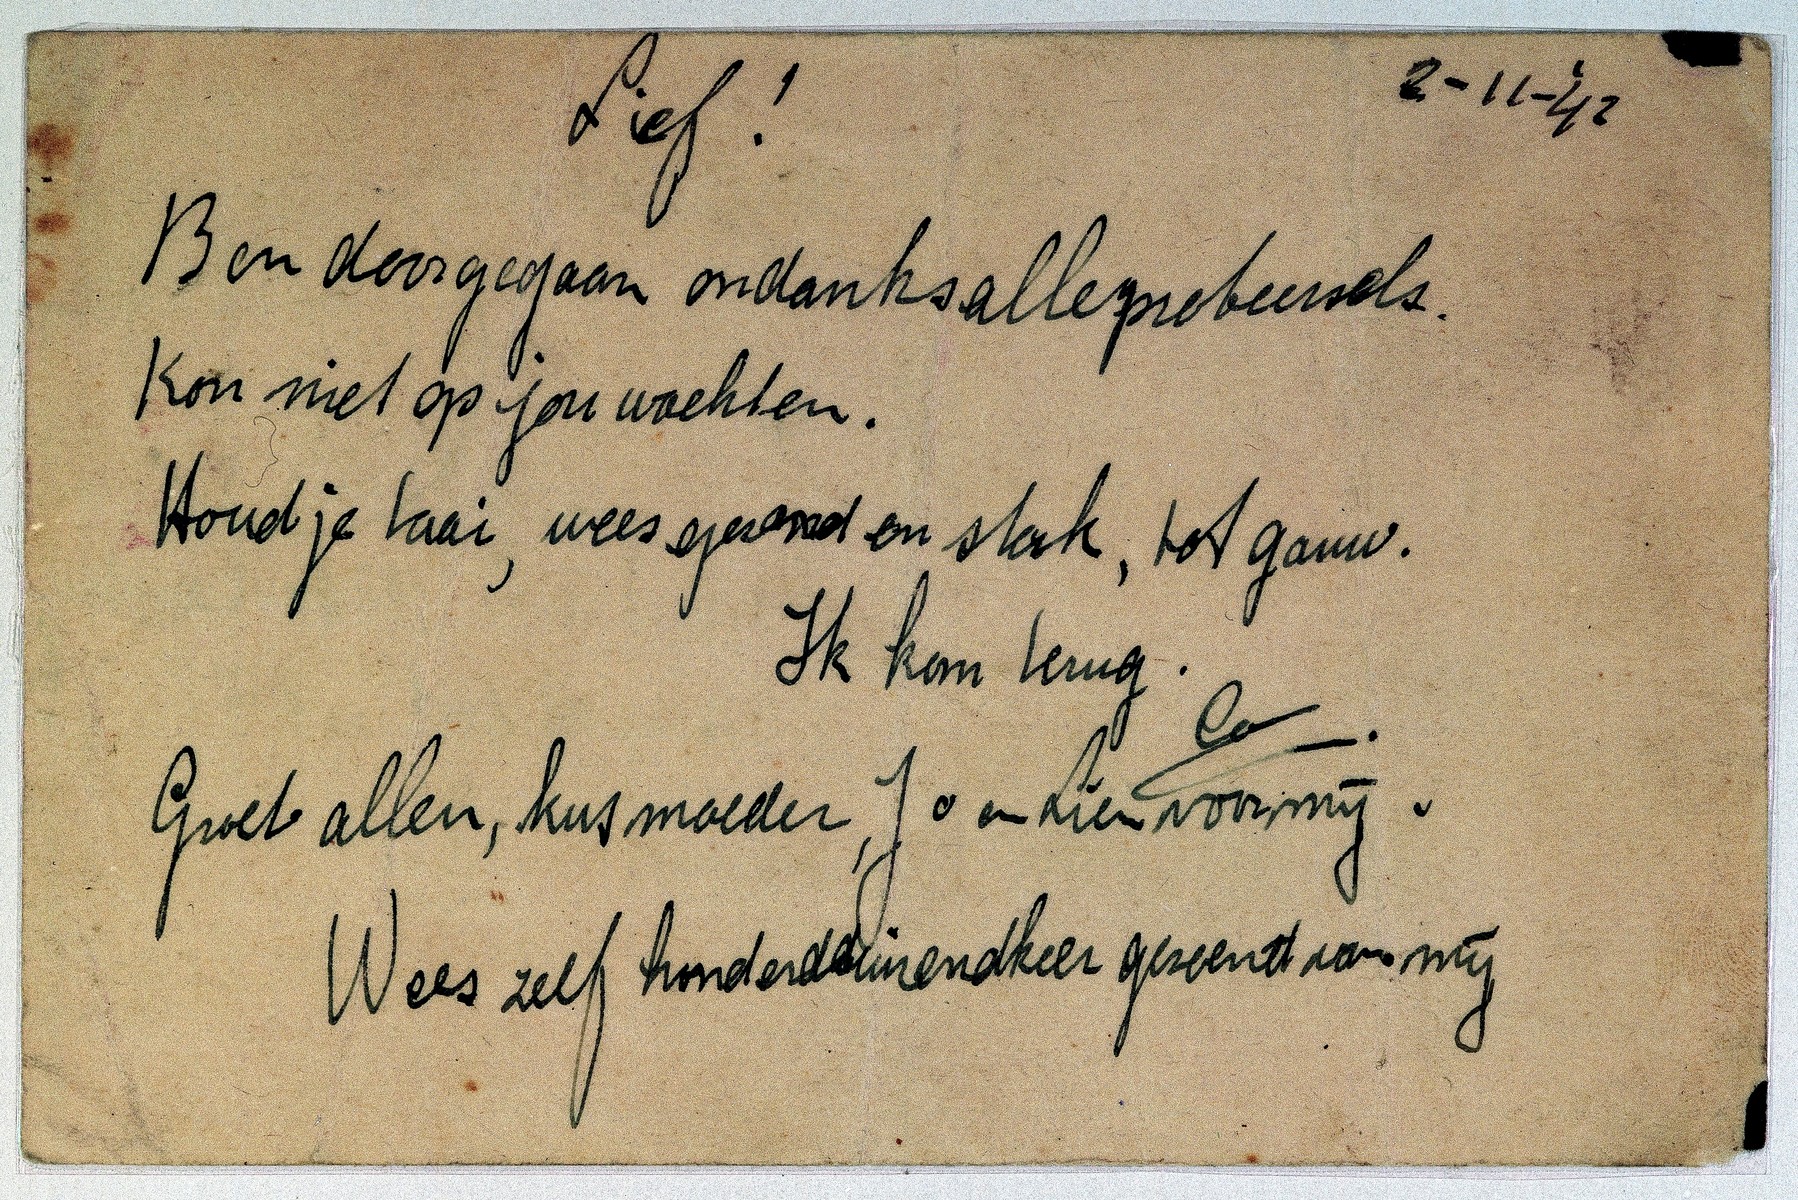 Verso of a postcard written from Coenraad Rood to his wife Elisabeth shortly from the deportation train from the Westerbork camp.

He writes, "My love!  I kept going despite trying everything. I cannot wait for you. Keep up your strength; be healthy and strong, I’ll see you soon. I’ll come back. Regards to all, kiss mother, Jo, and Lien for me. I kiss you a hundred thousand times."